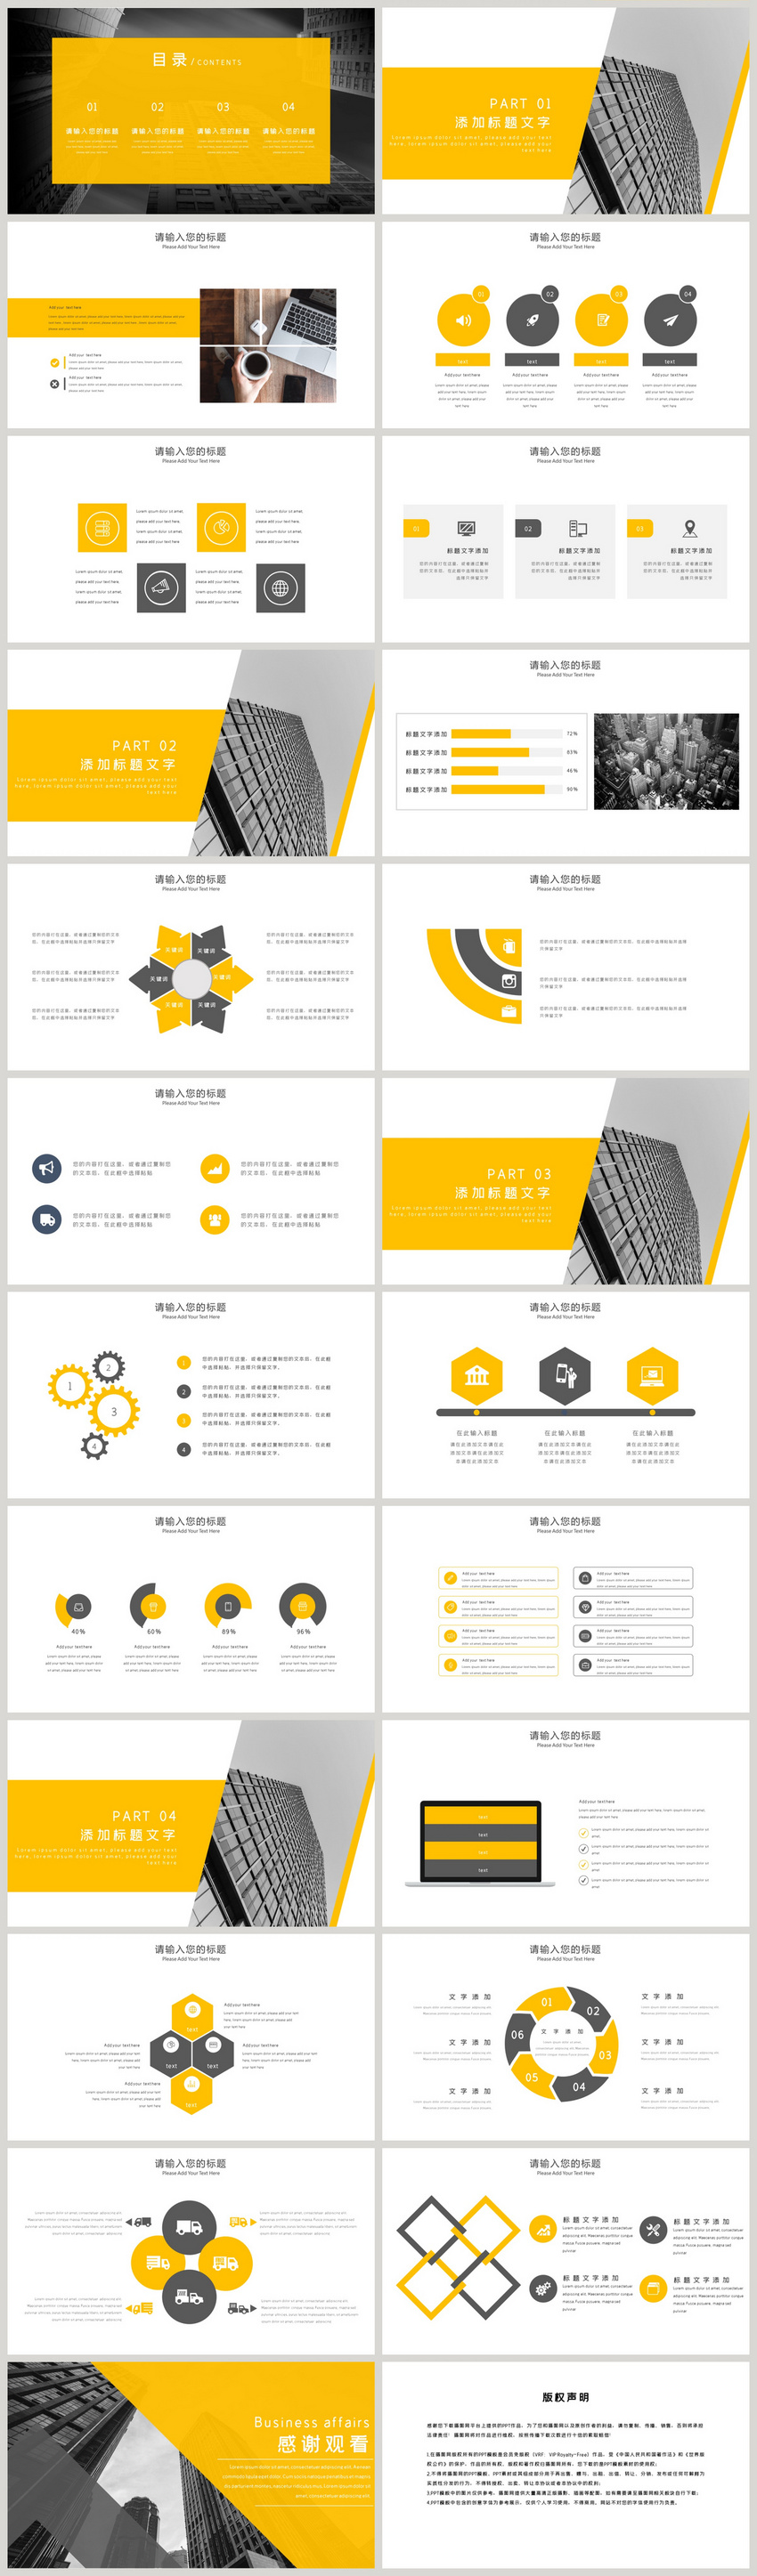 Black And Yellow Minimalist Work Report Ppt Template Powerpoint Templete Ppt Free Download 401578700 Lovepik Com